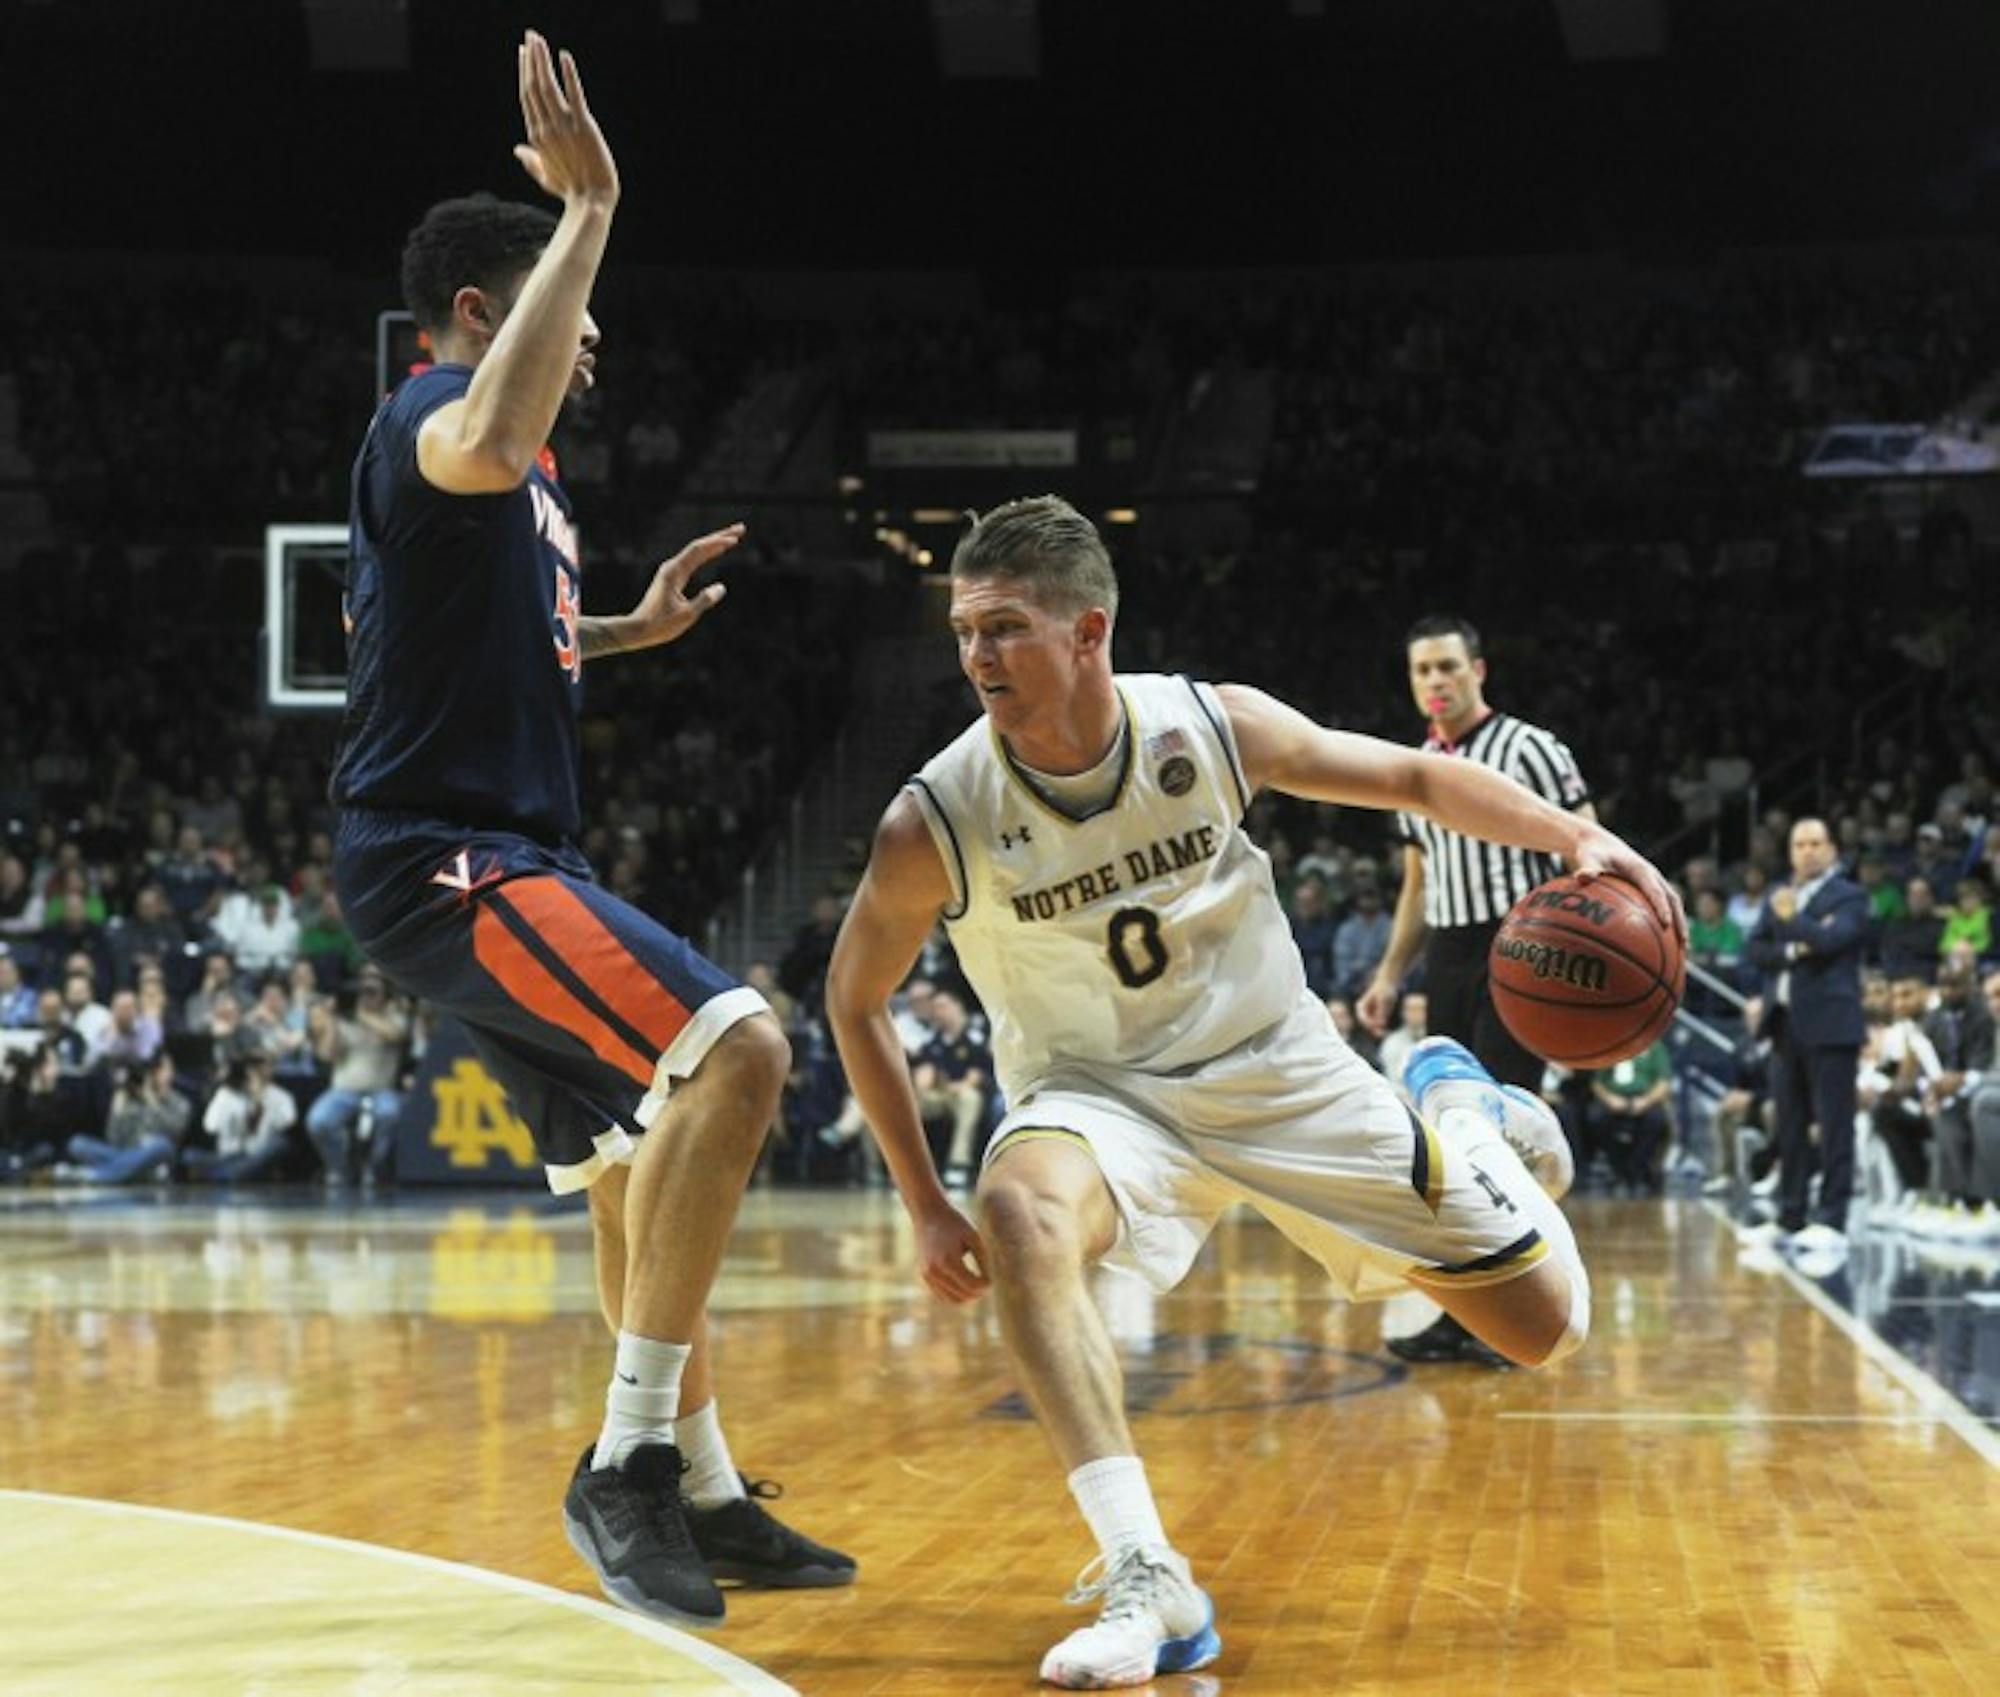 Irish sophomore Rex Pflueger drives towards the baseline during Notre Dame’s 71-54 loss to Virginia on Tuesday at Purcell Pavilion.